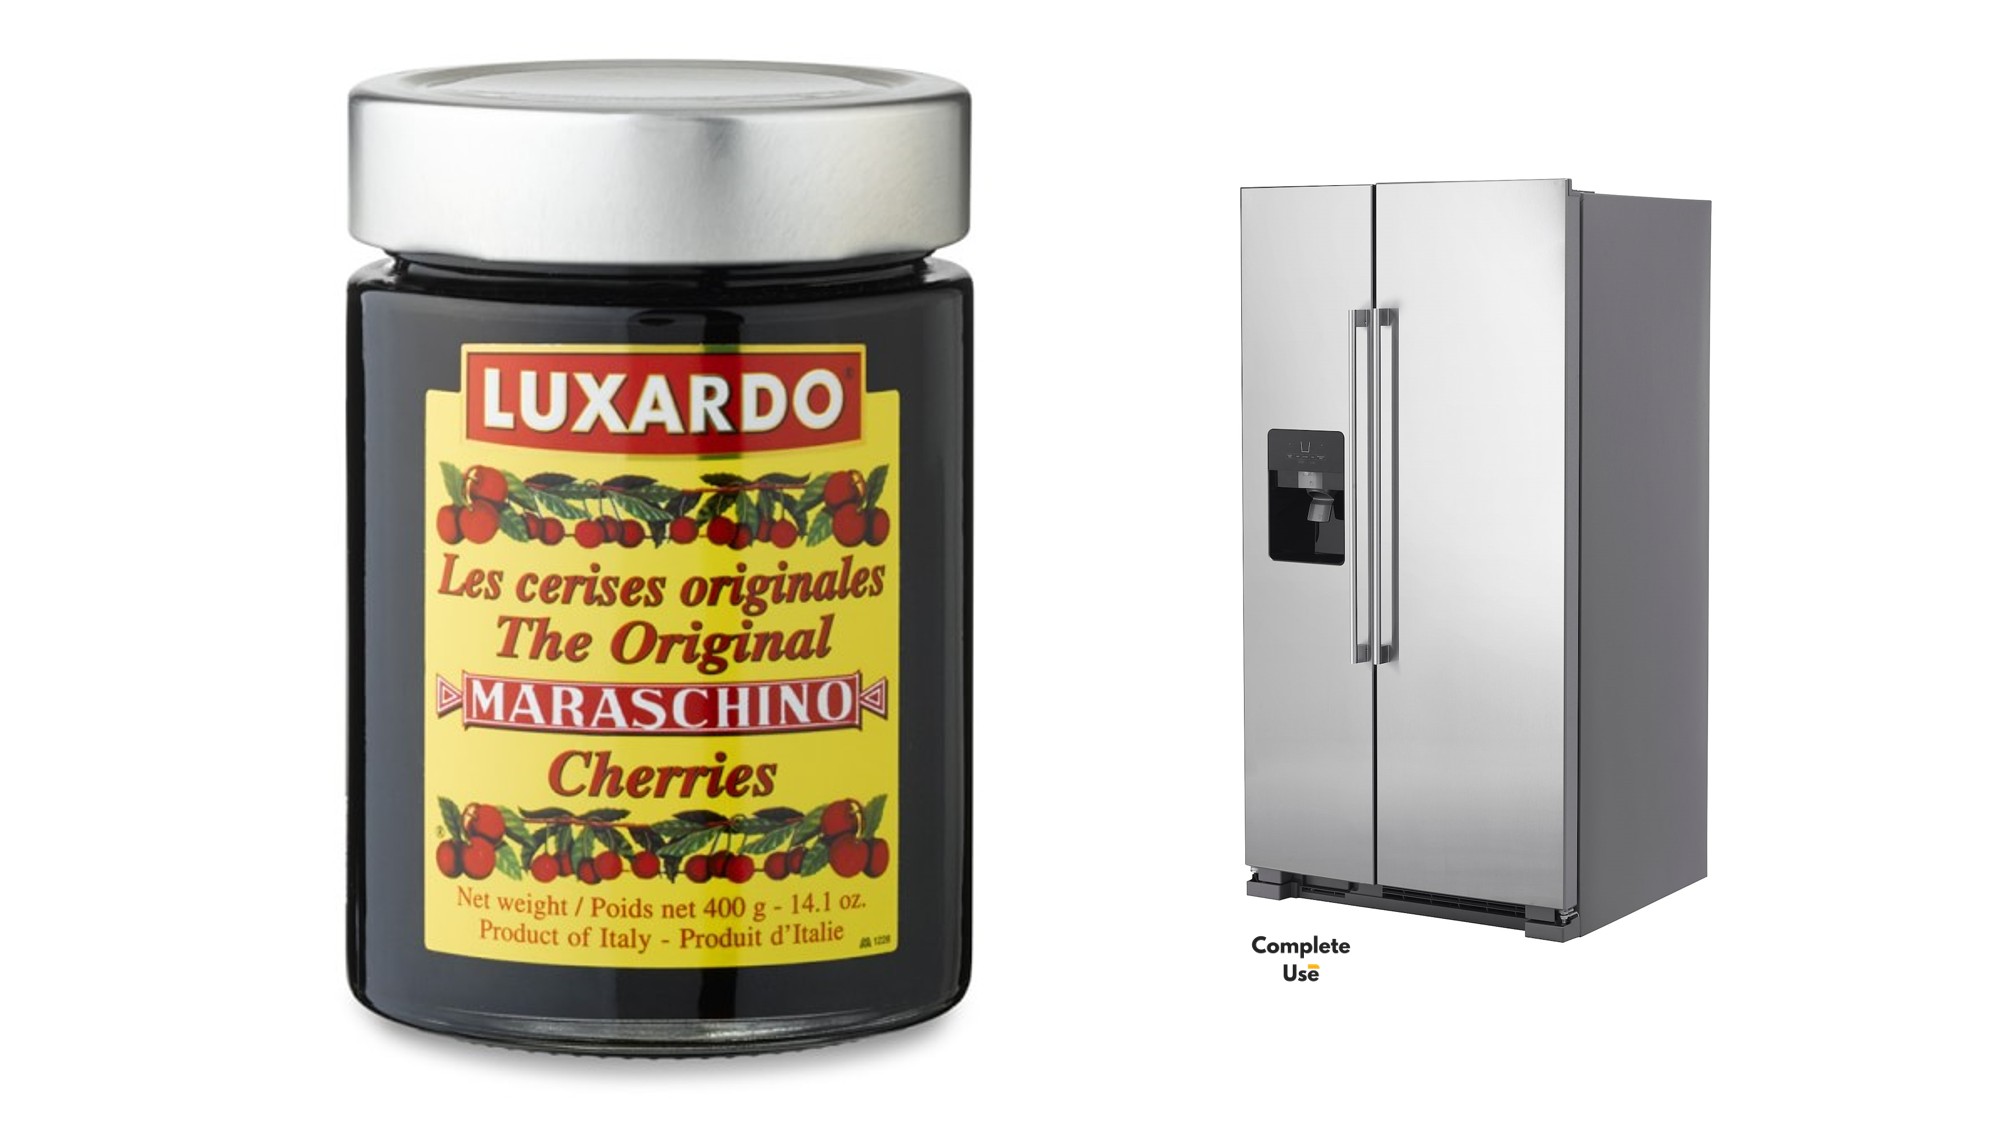 Do you Refrigerate Luxardo Cherries? - Complete Use